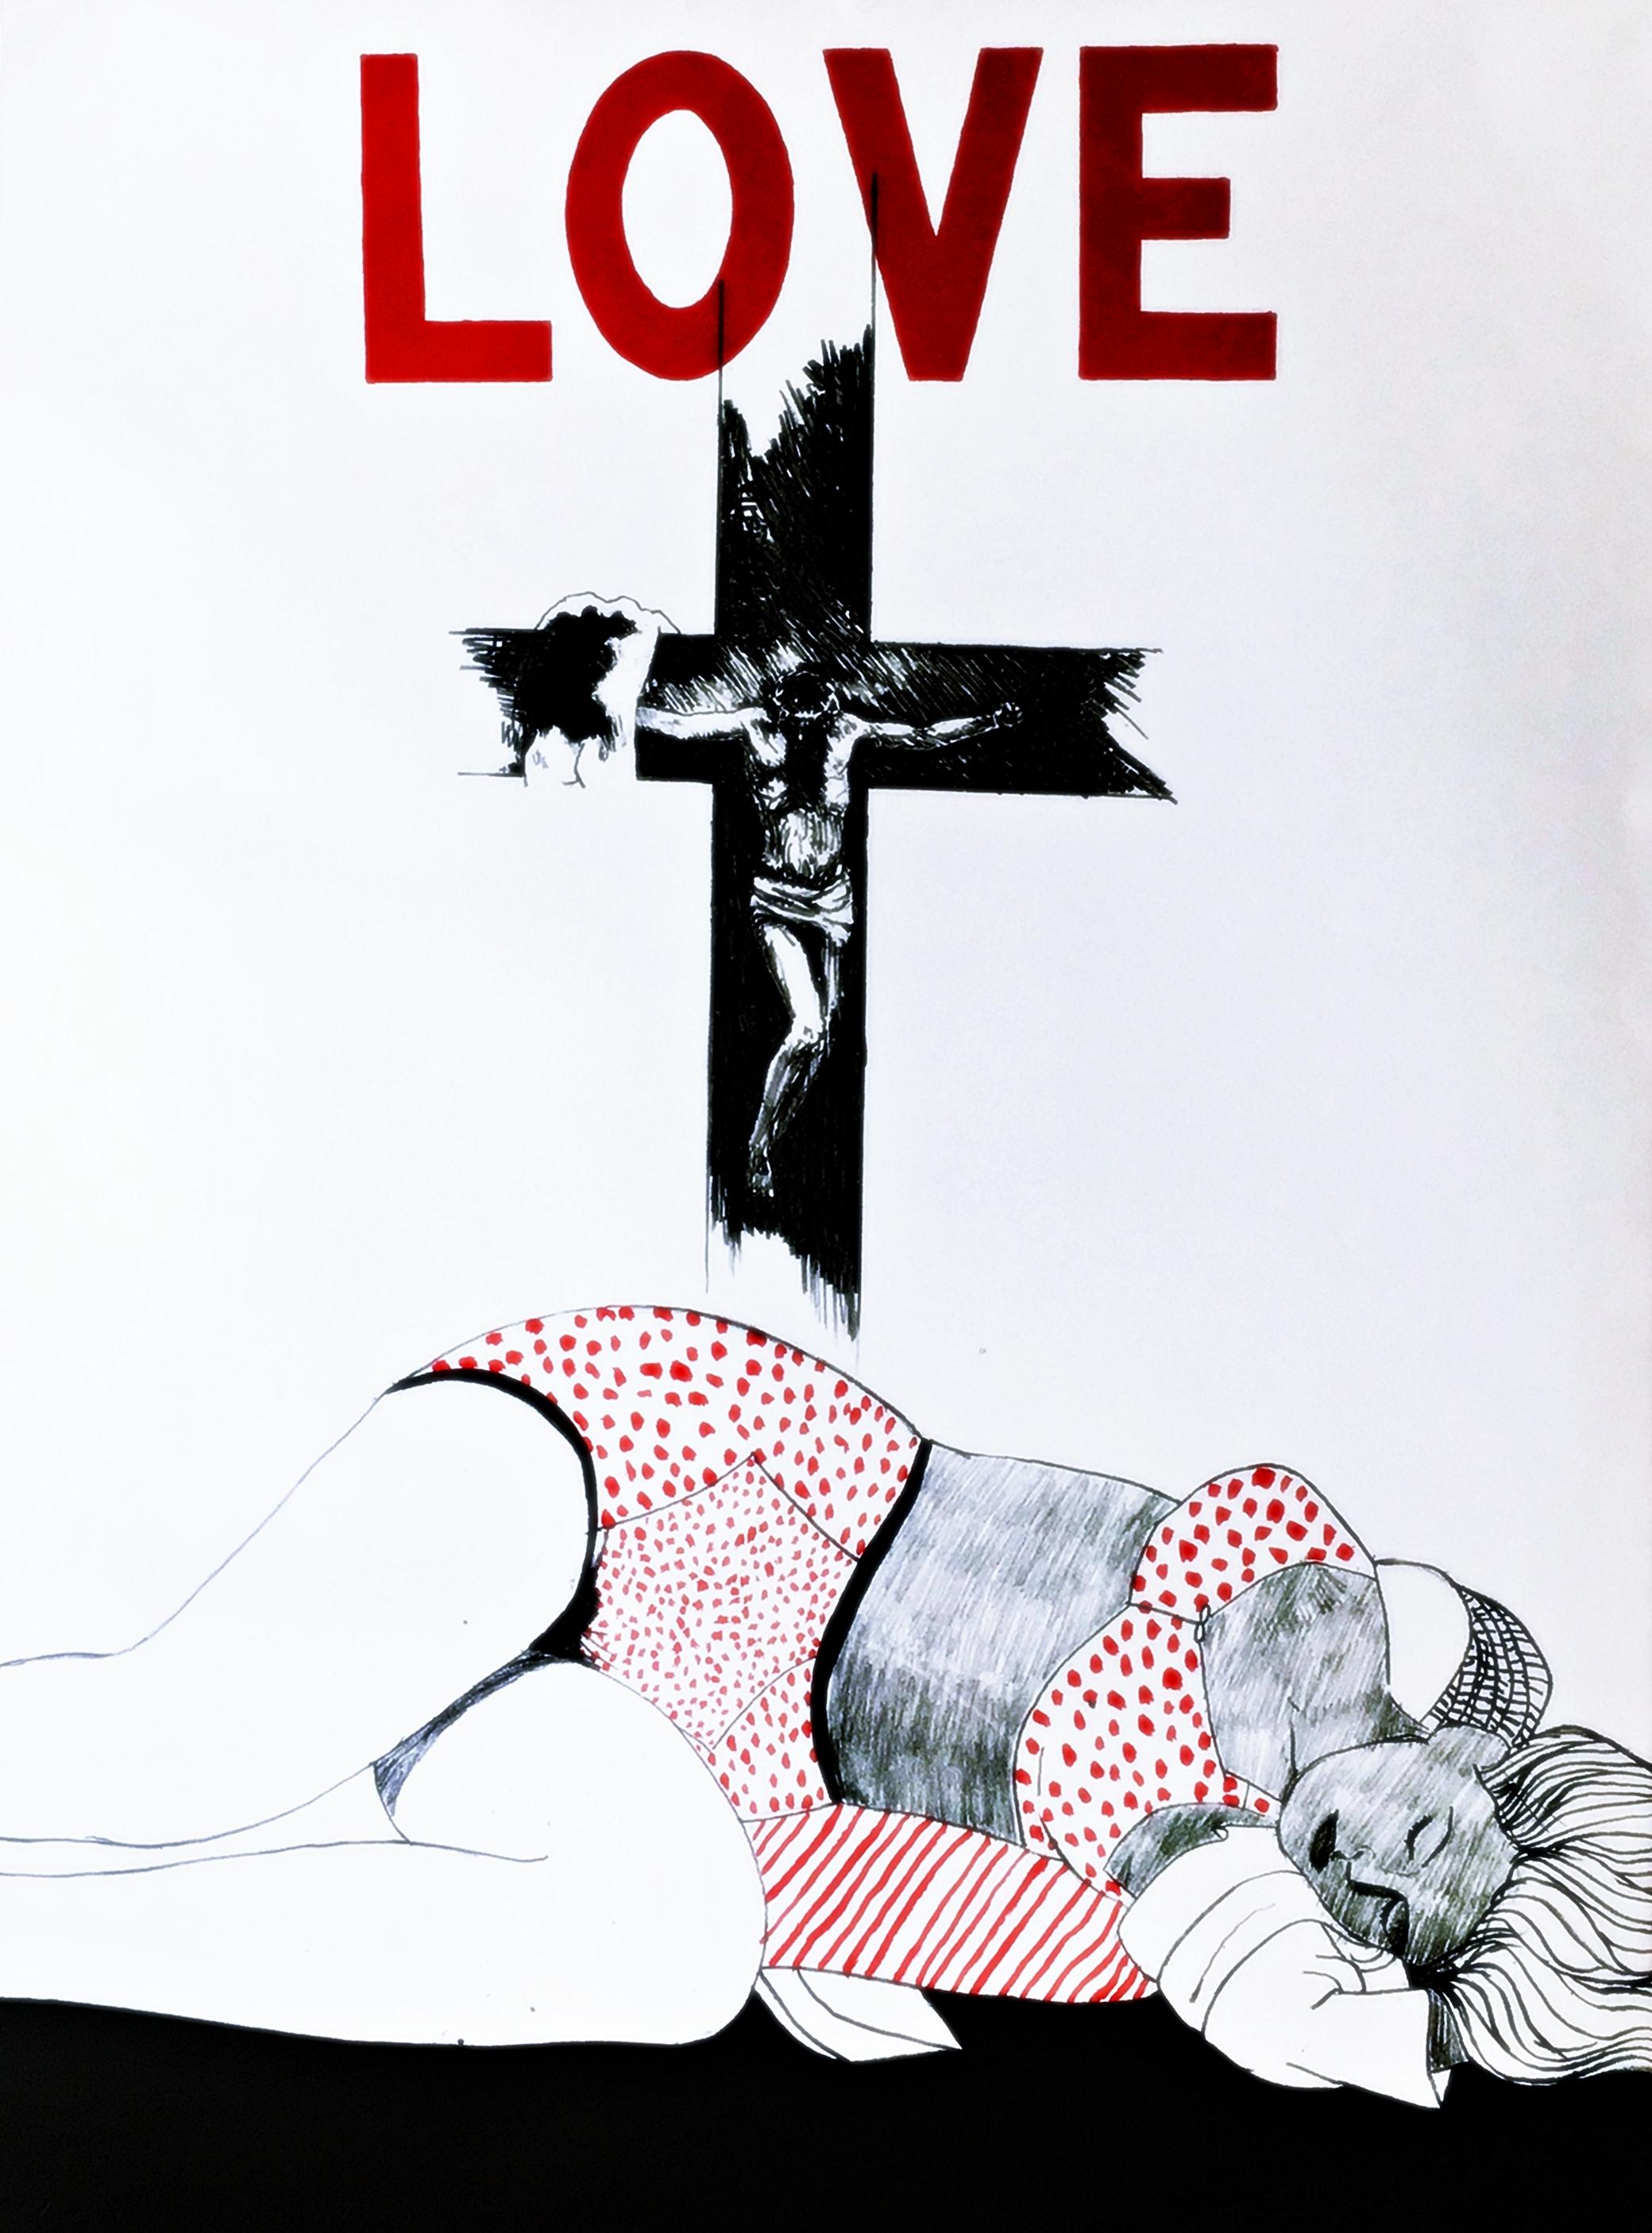 James Strombotne
Love, 1965
Lithograph with Deckled Edges
Hand signed, dated and annotated 